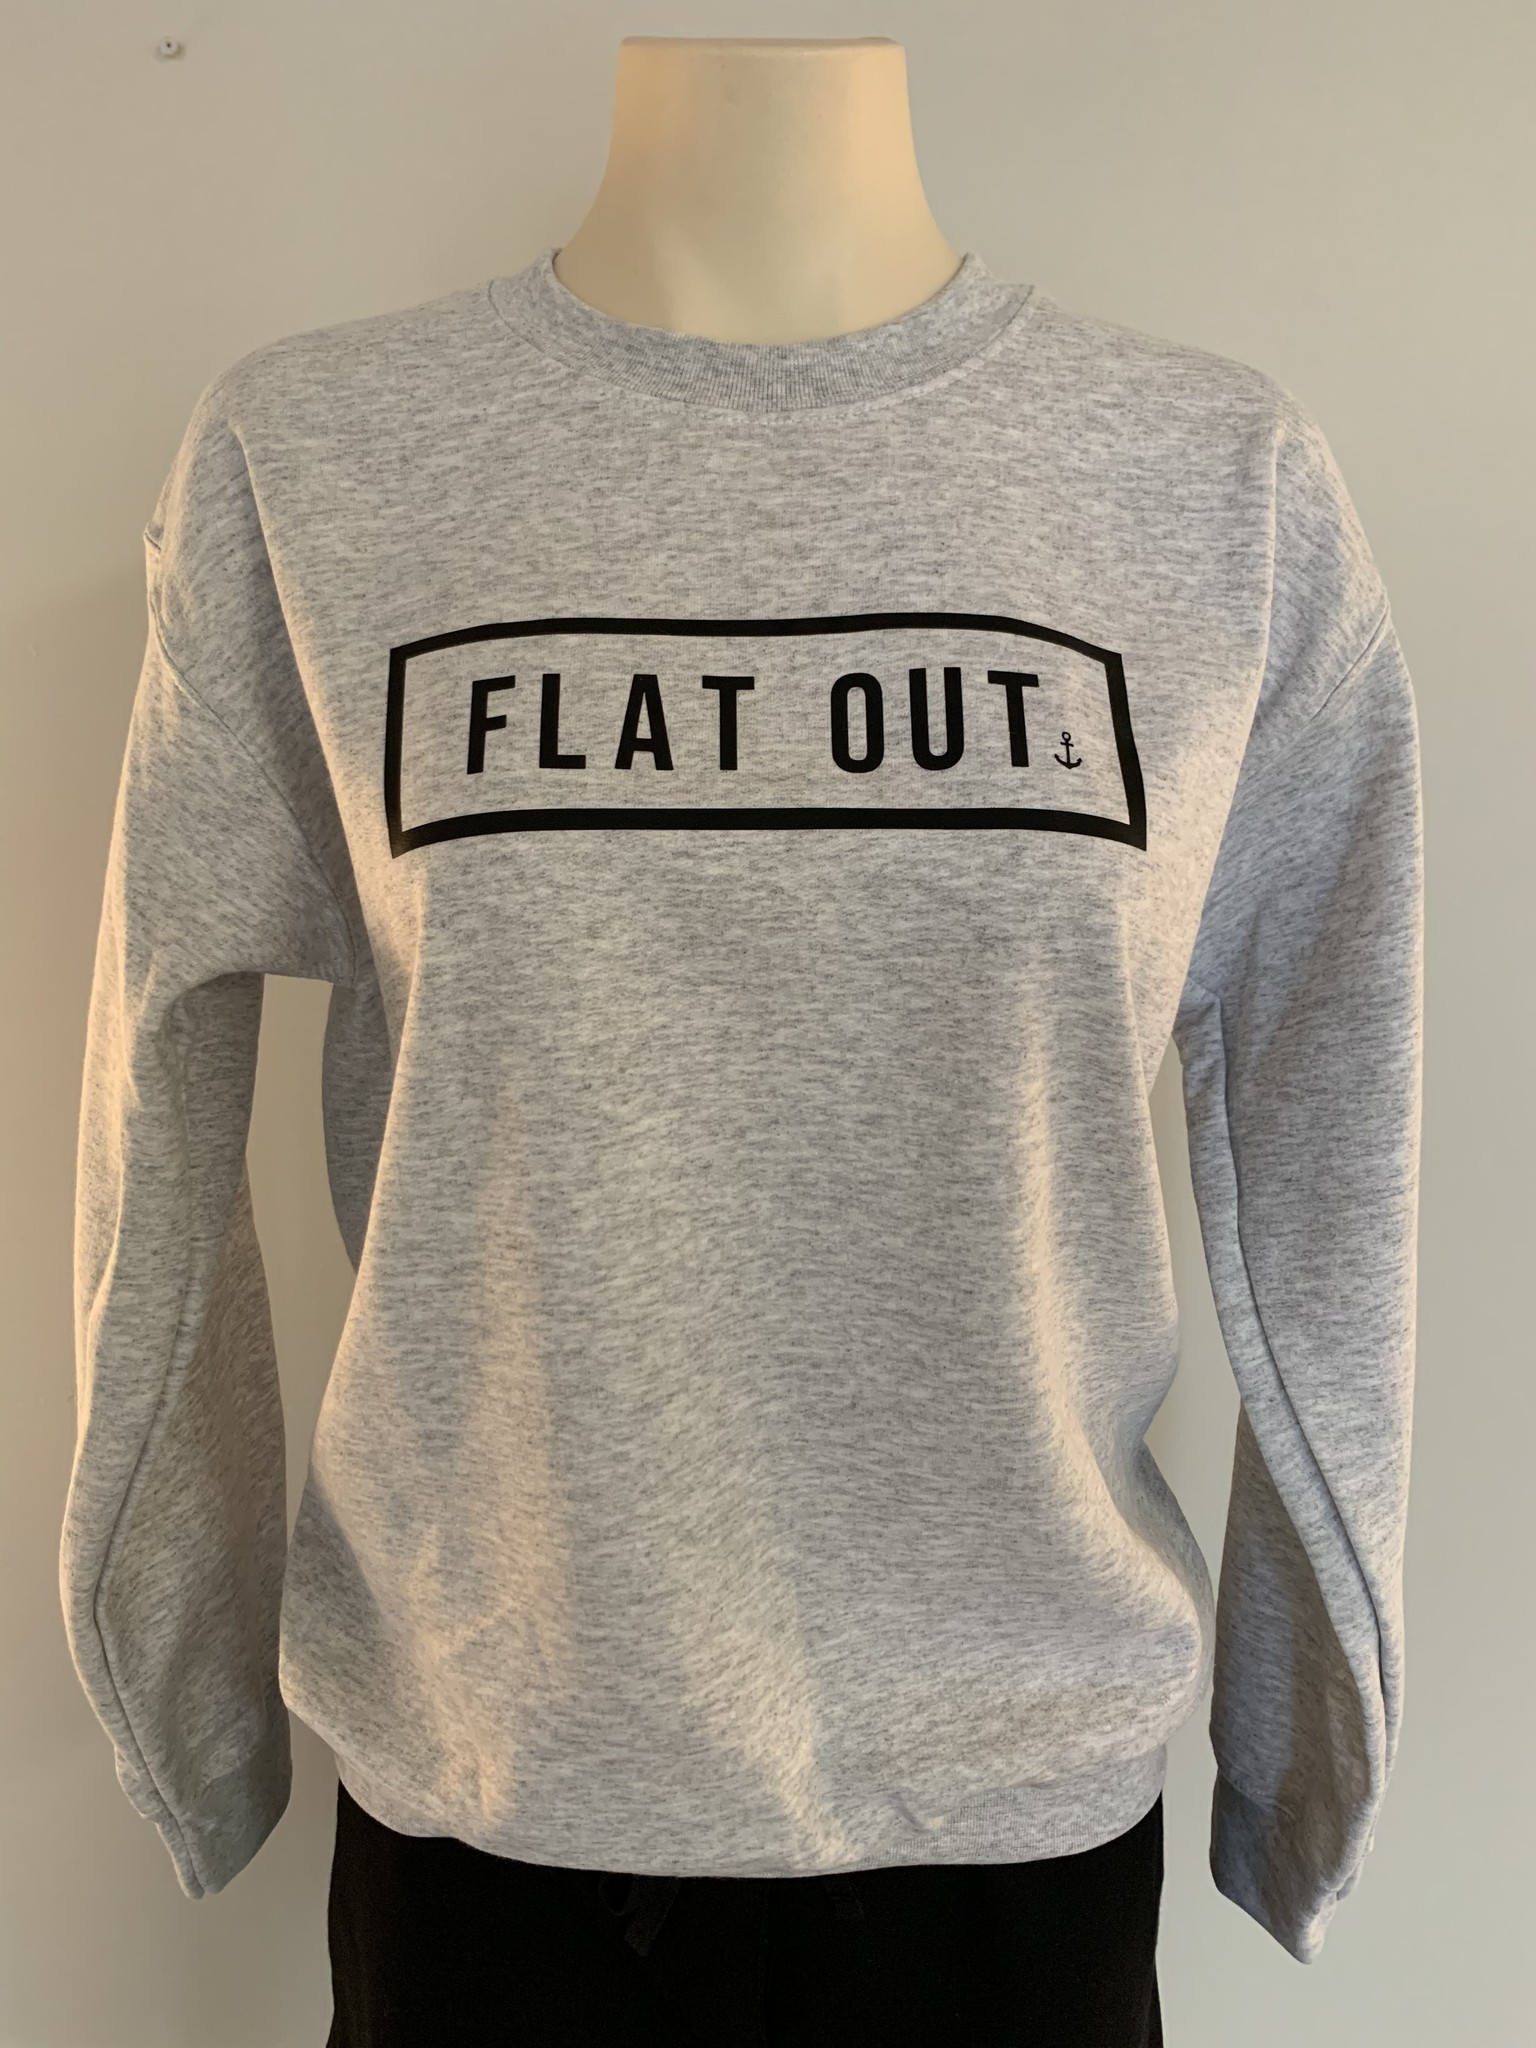 Saltwater Designs Saltwater Designs "Flat Out"  Sweater